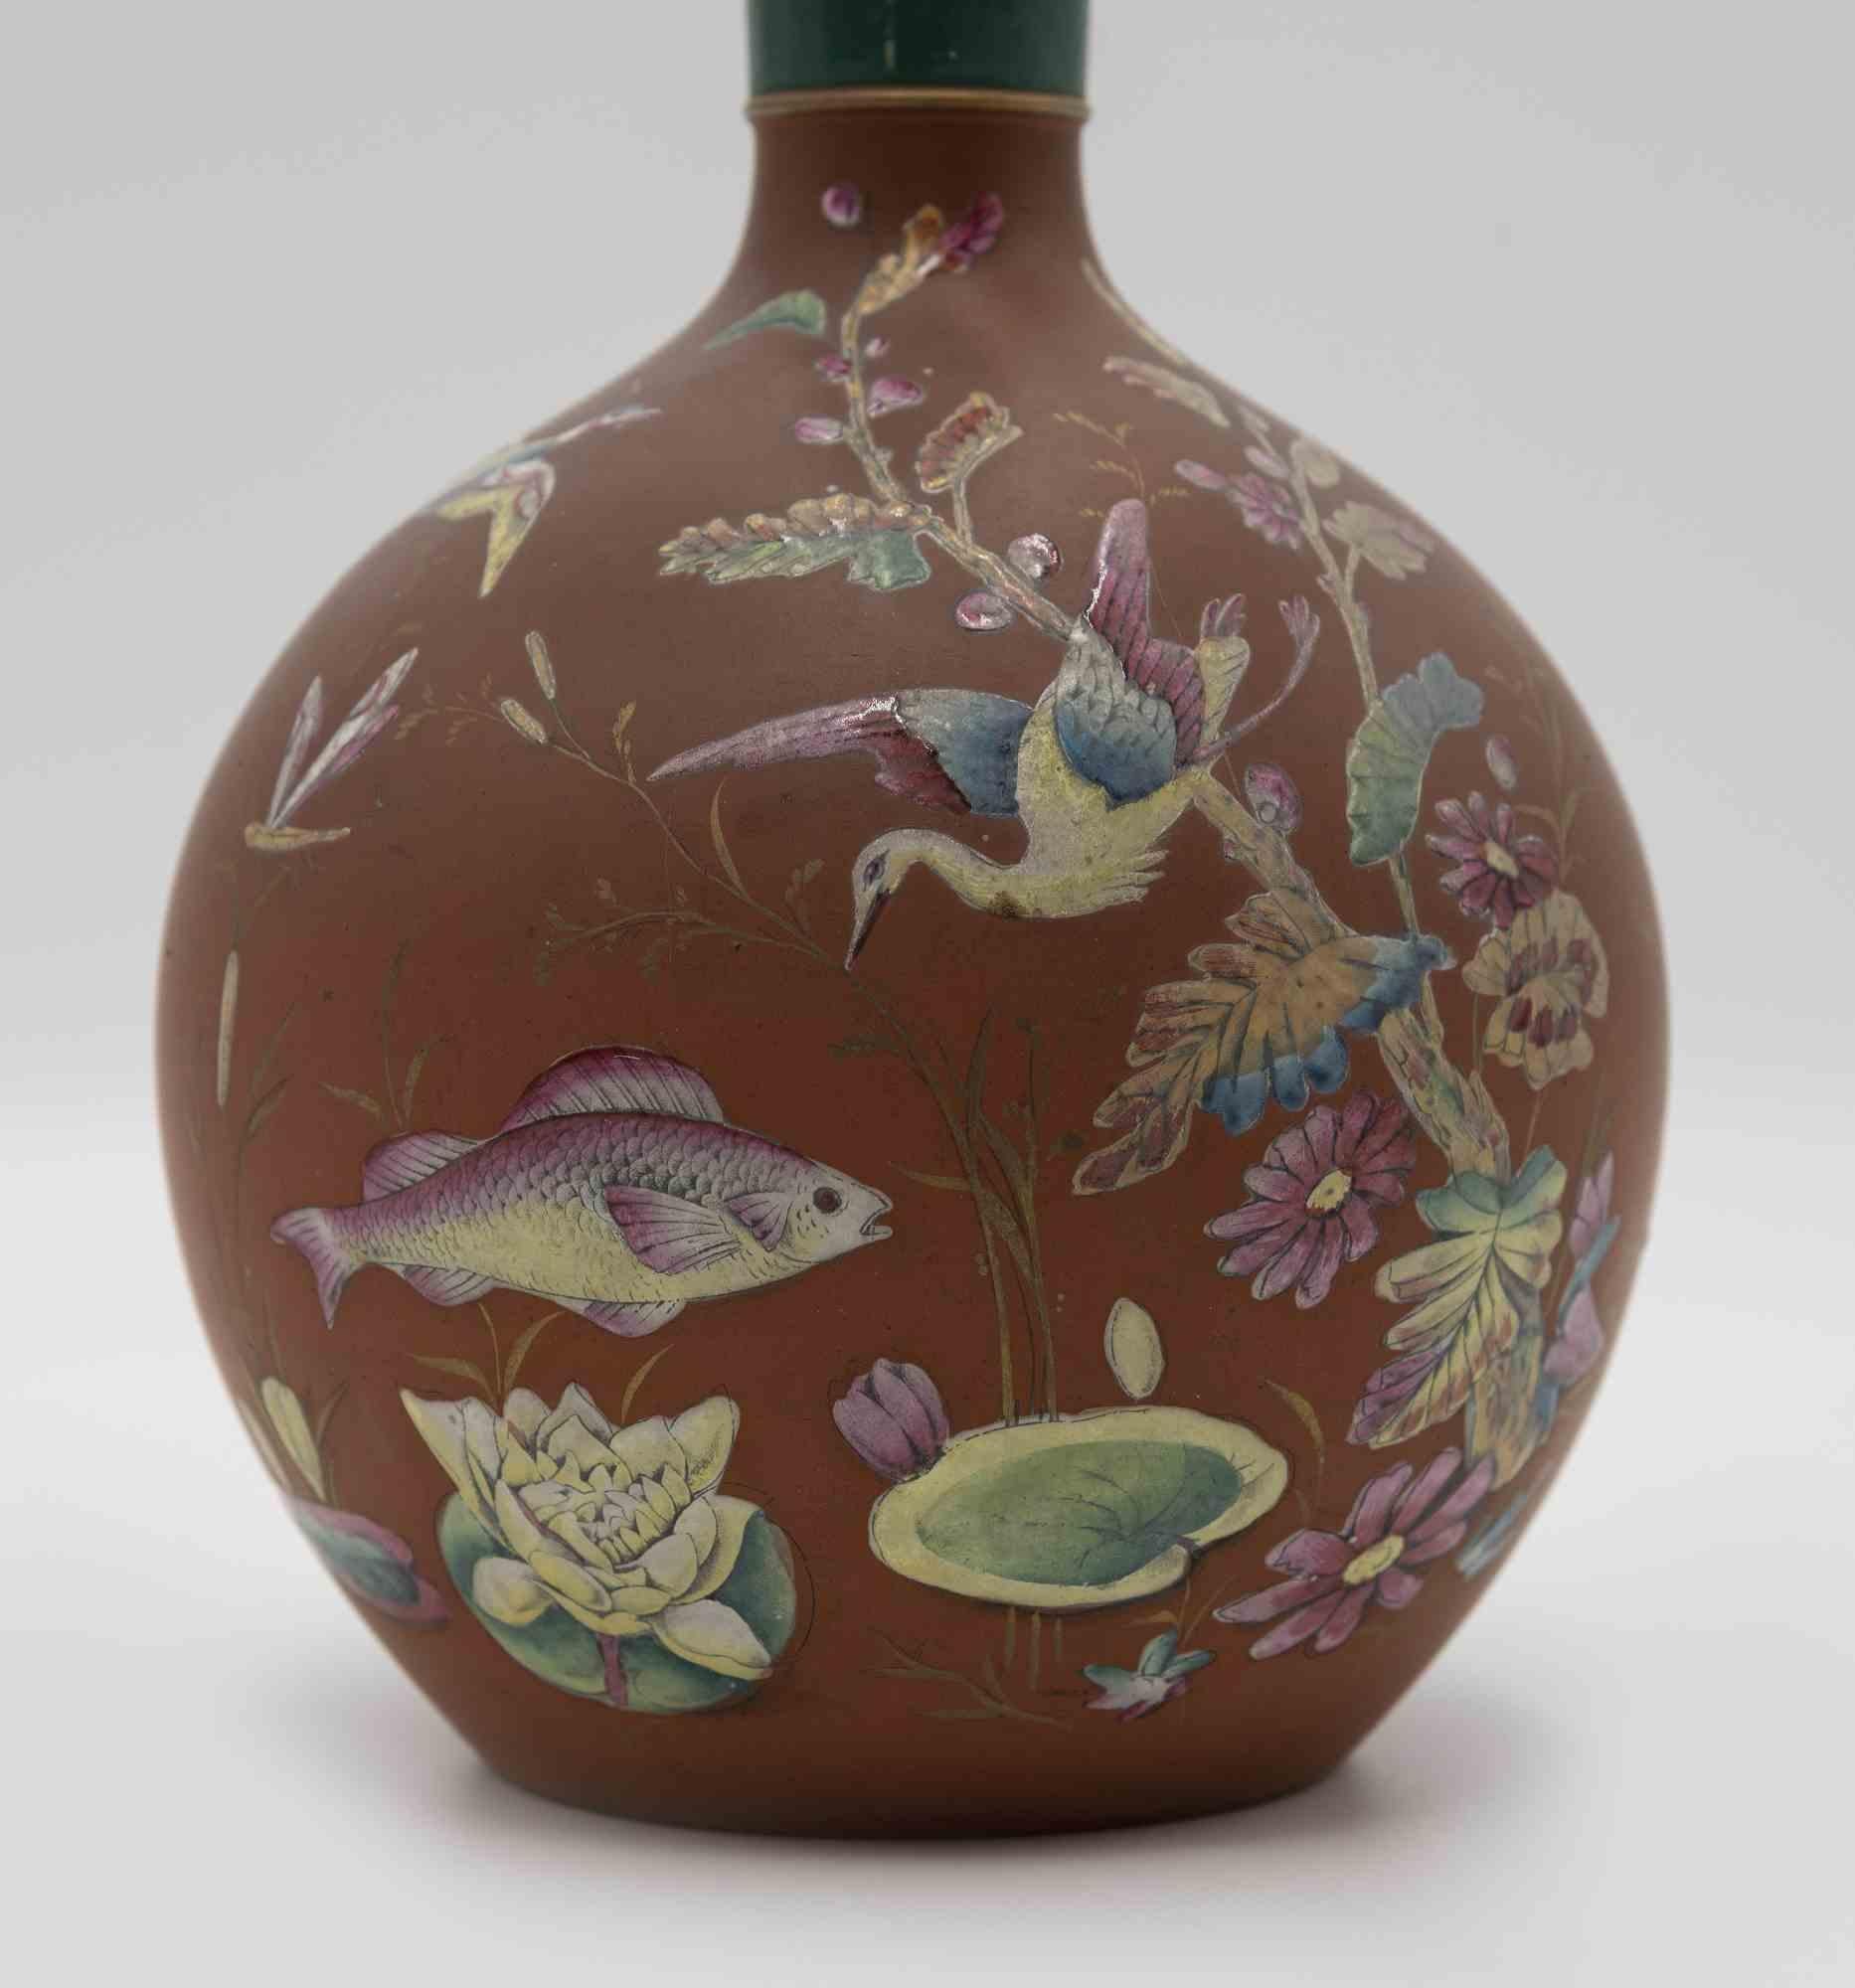 Modern Bottle with Natural Decorations, Early 20th Century